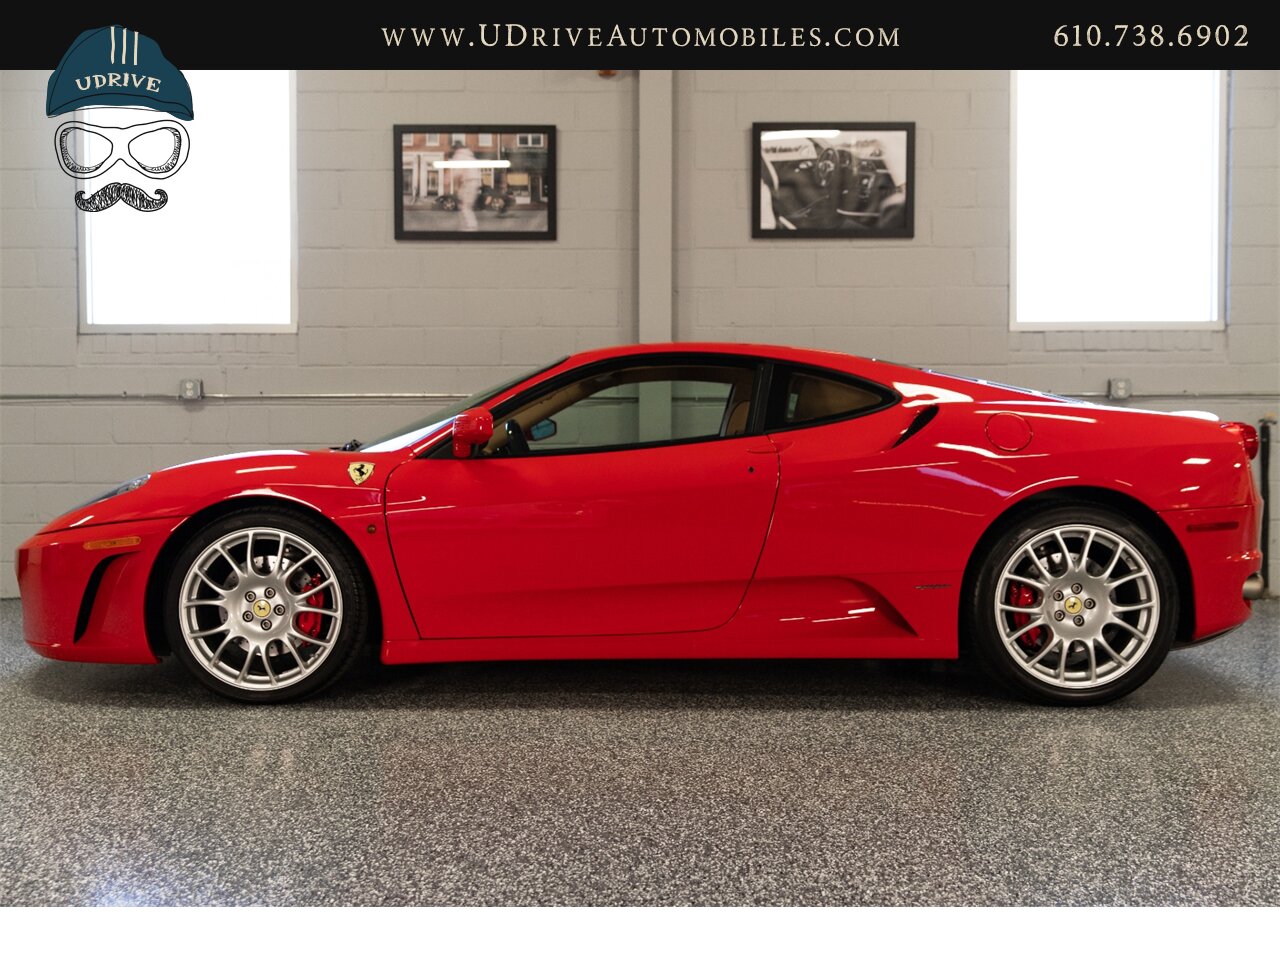 2006 Ferrari F430 F1 Coupe 1 Owner Daytona Seats Challenge Whls  Carbon Fibre Upper Lower Zone Shields Piping Serv Hist $208k MSRP - Photo 3 - West Chester, PA 19382